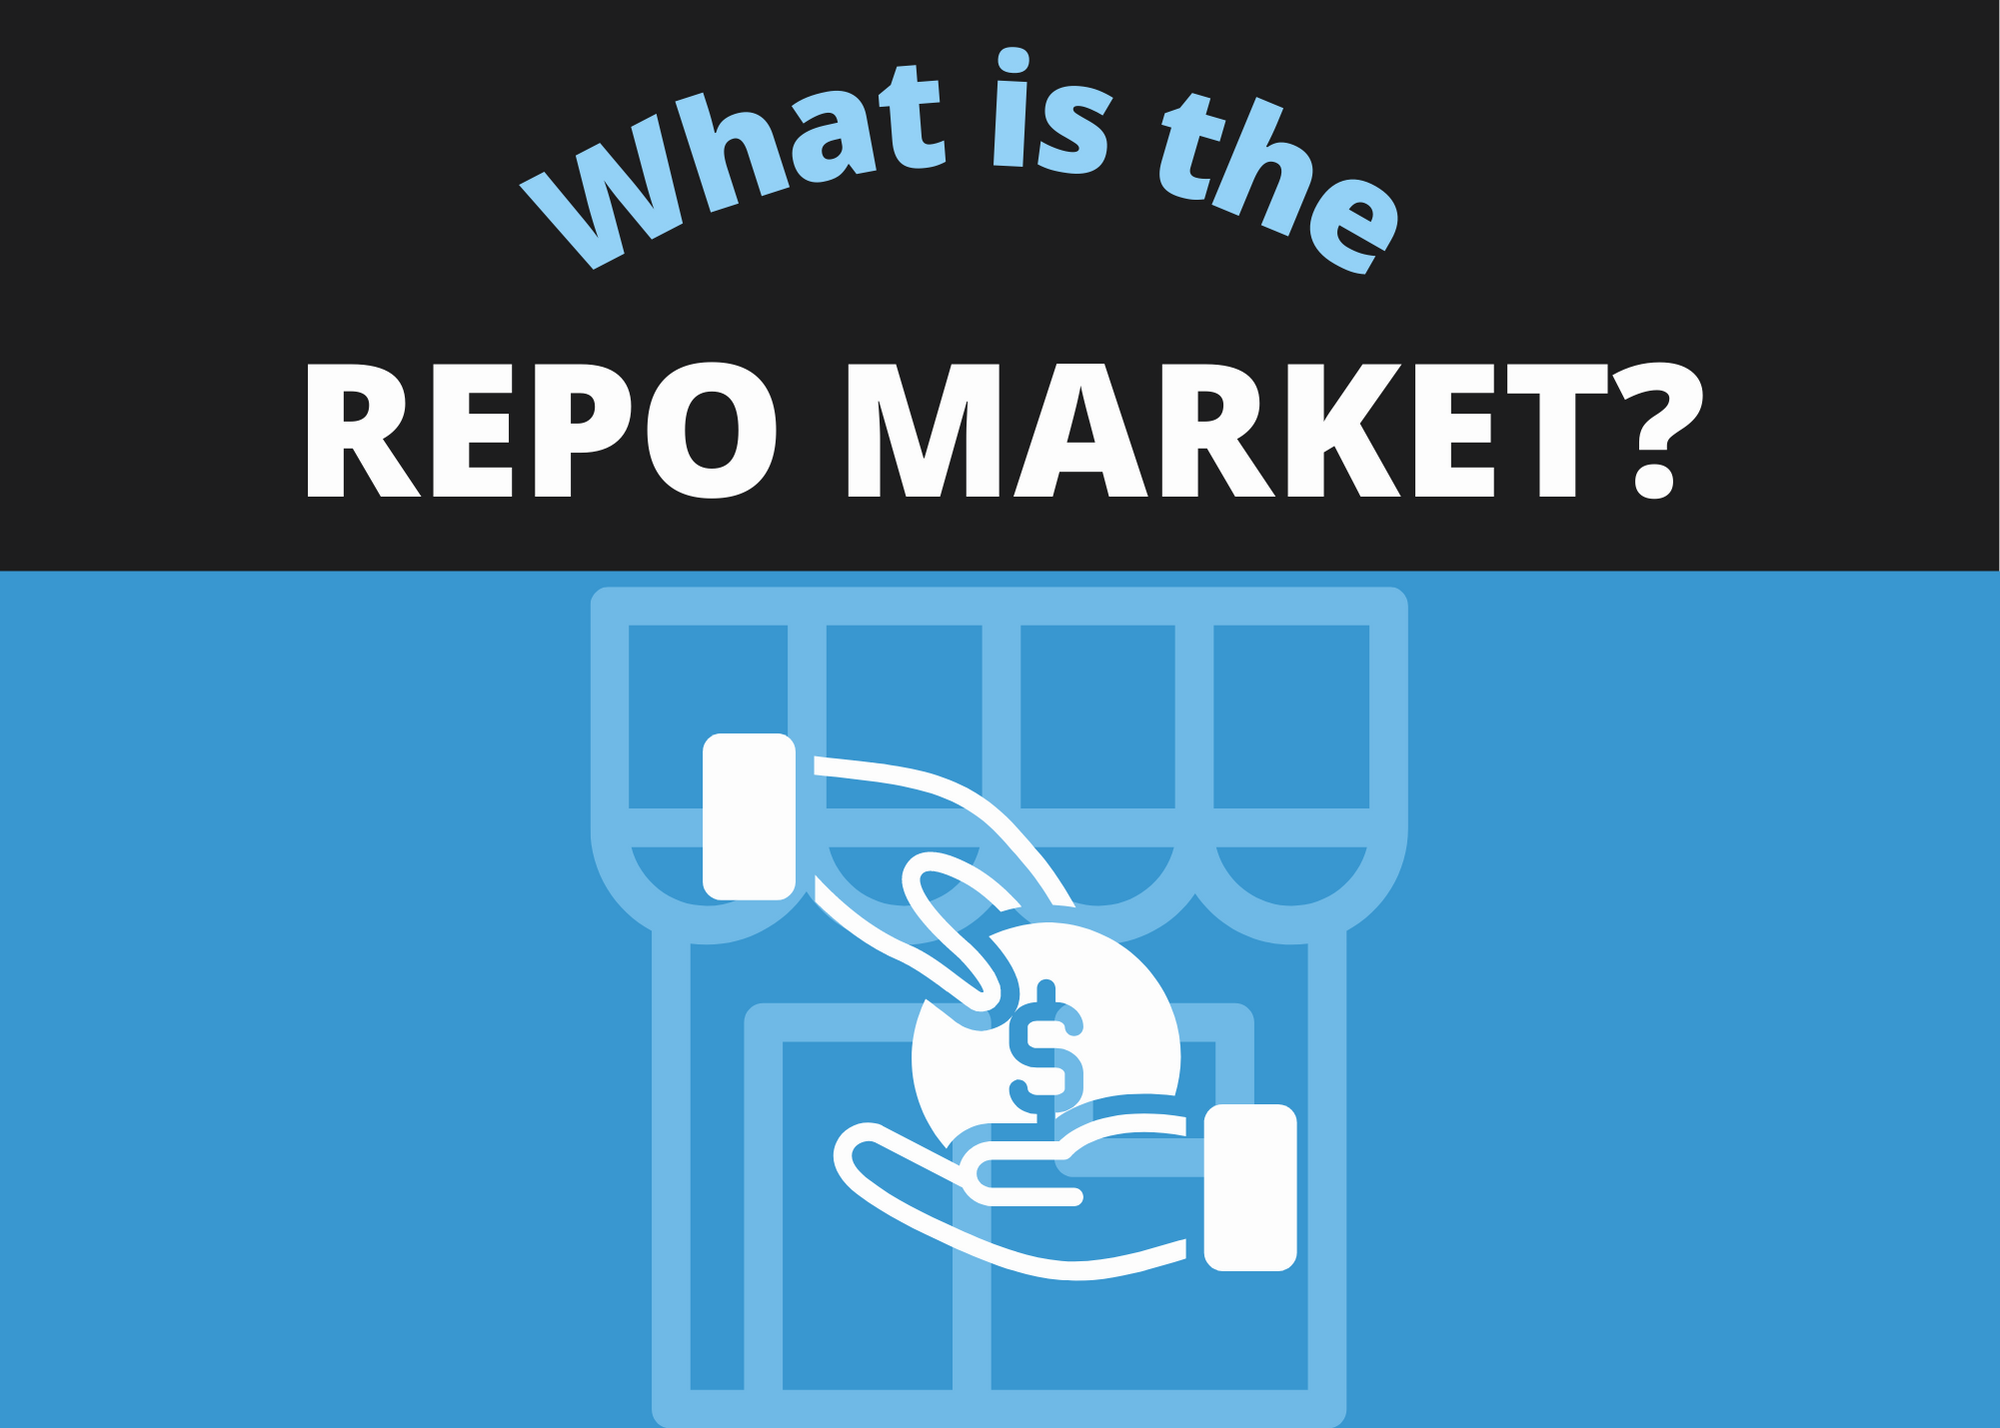 what is the repo market?